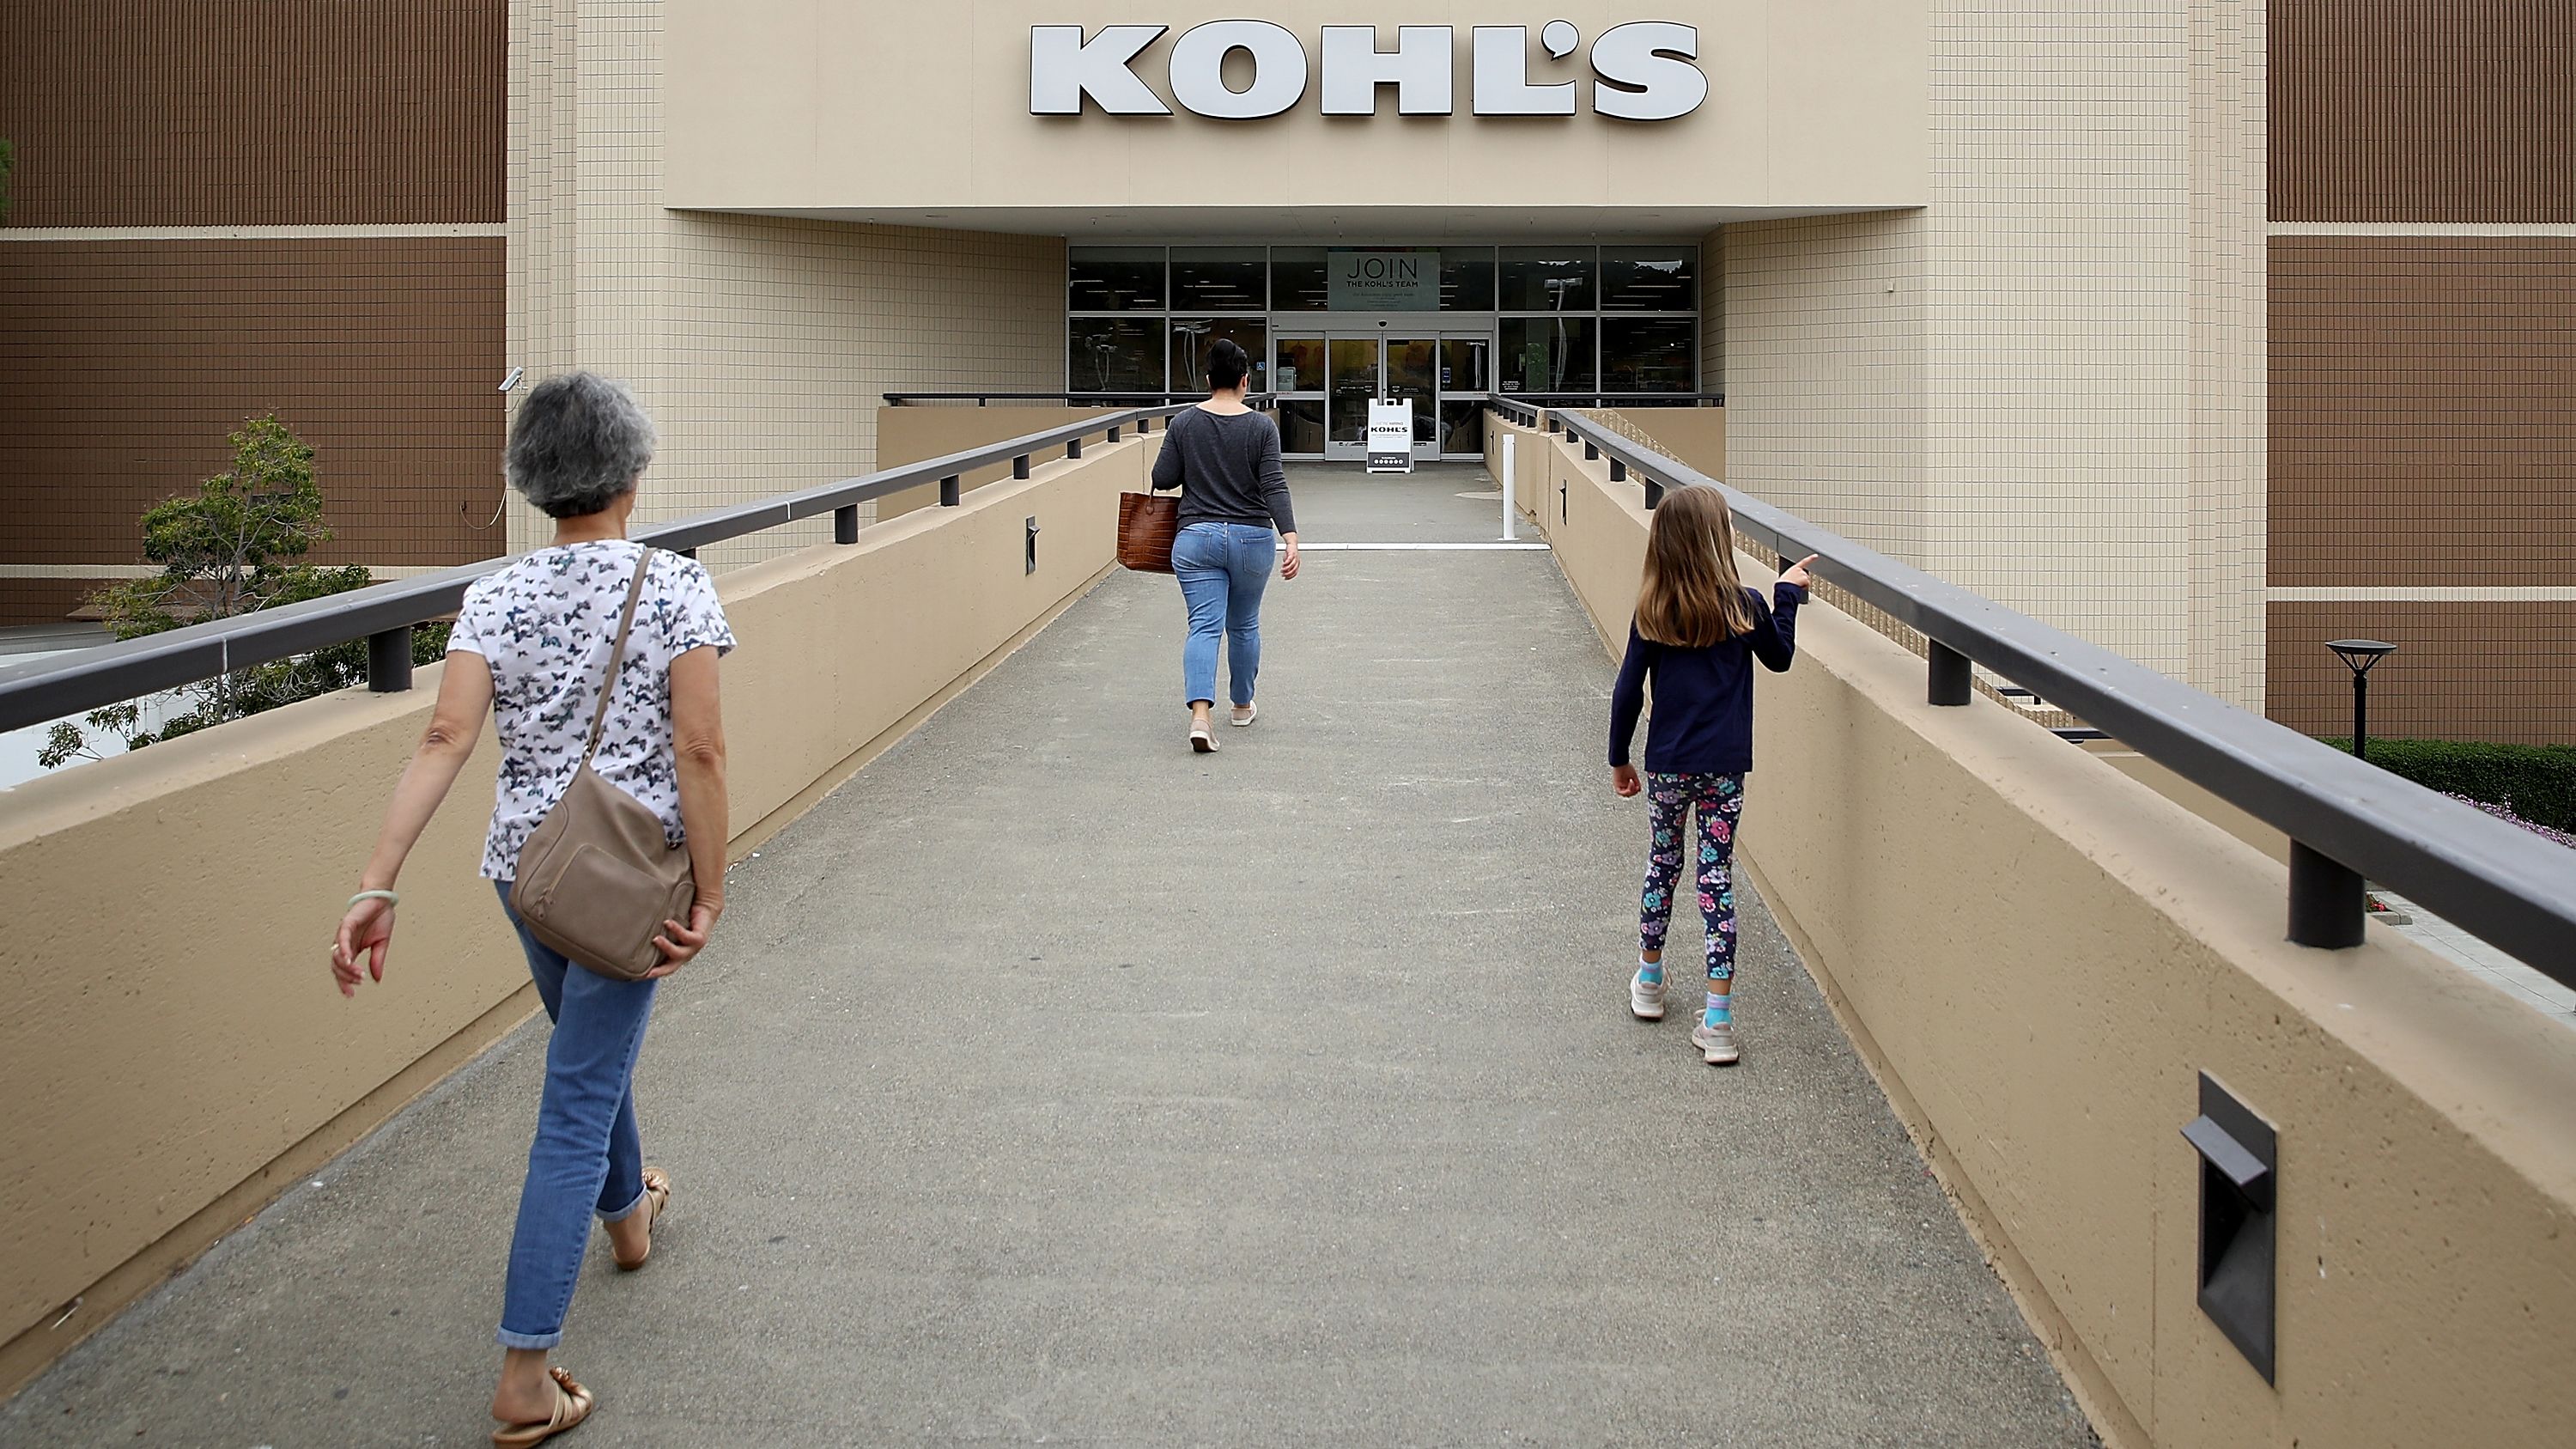 Kohl's partners with lifestyle brand PopSugar to target millennial shoppers